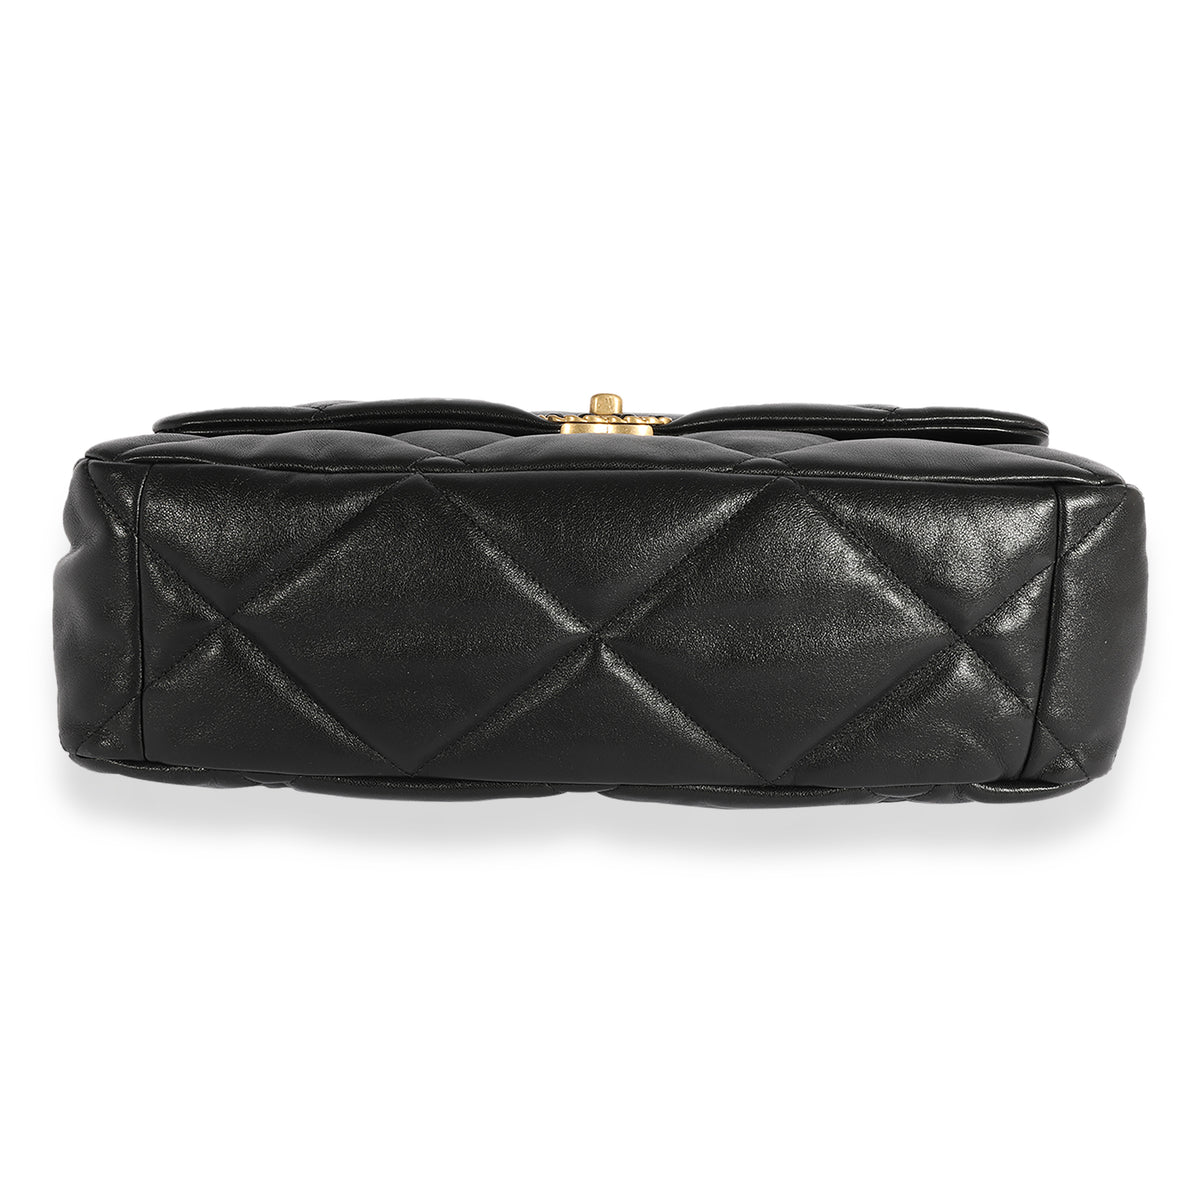 Chanel Black Quilted Leather Chanel 19 Flap Wallet Chanel